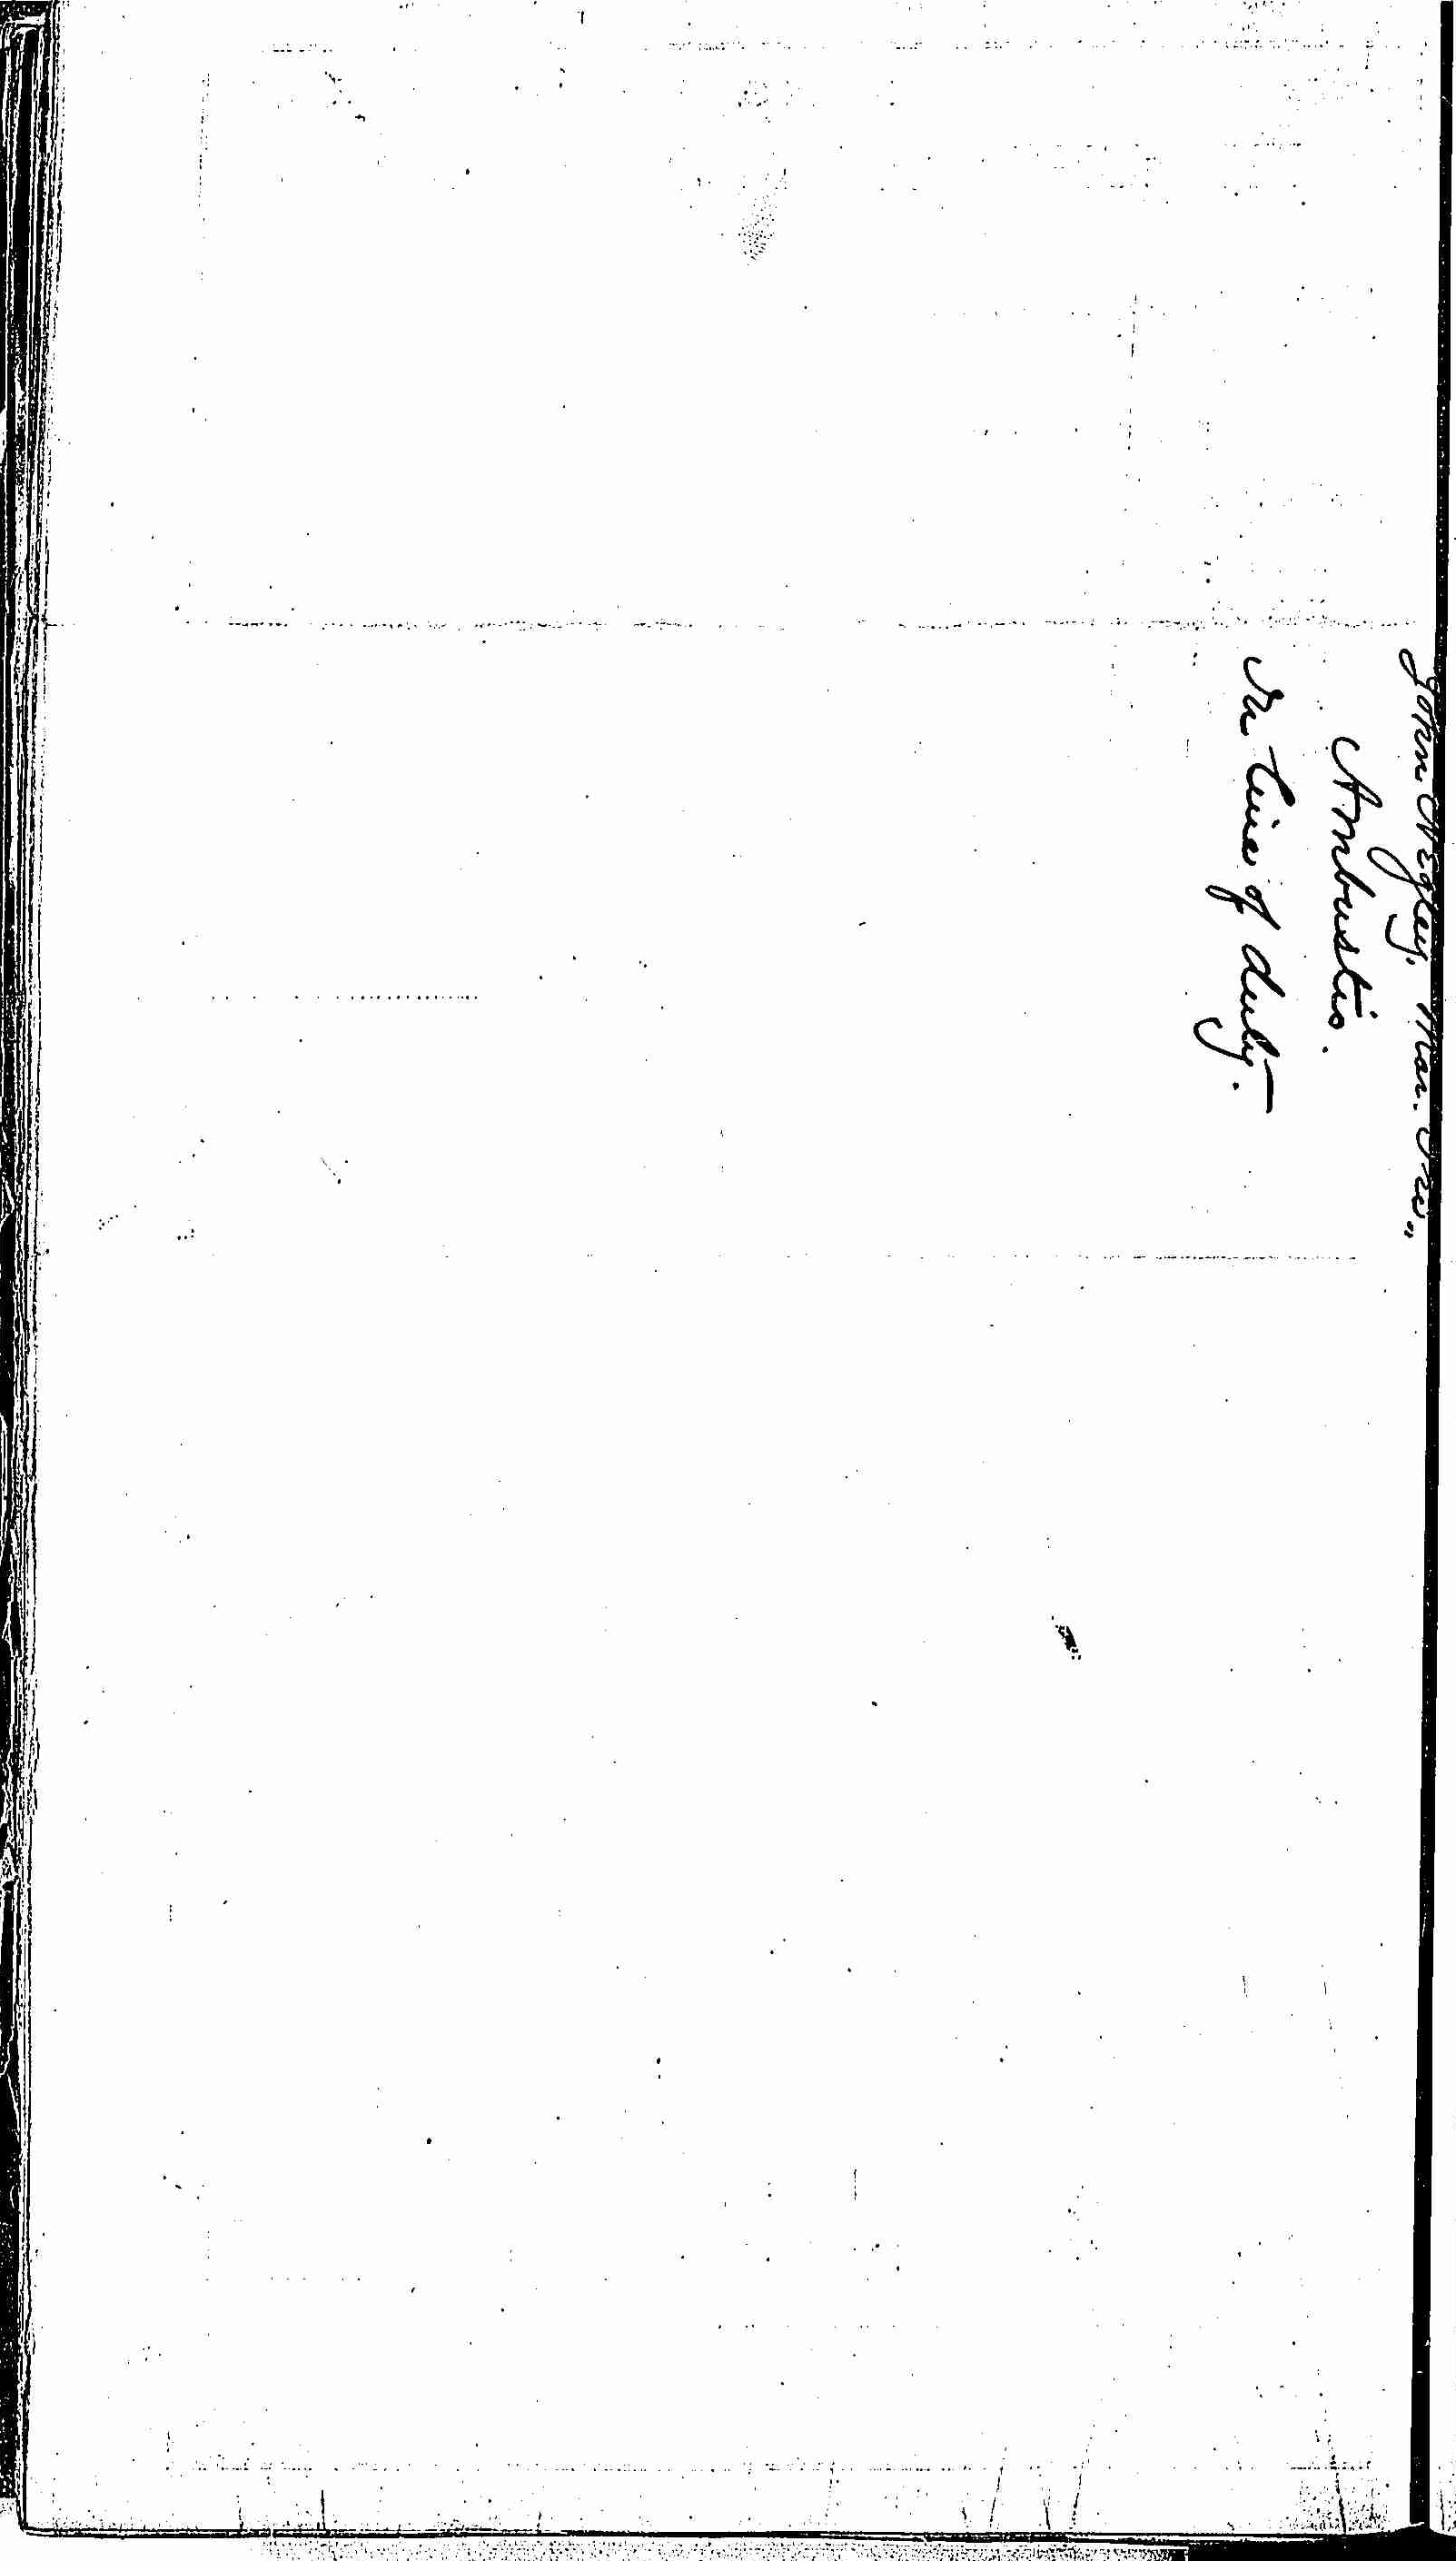 Entry for John Negley (page 2 of 2) in the log Hospital Tickets and Case Papers - Naval Hospital - Washington, D.C. - 1866-68